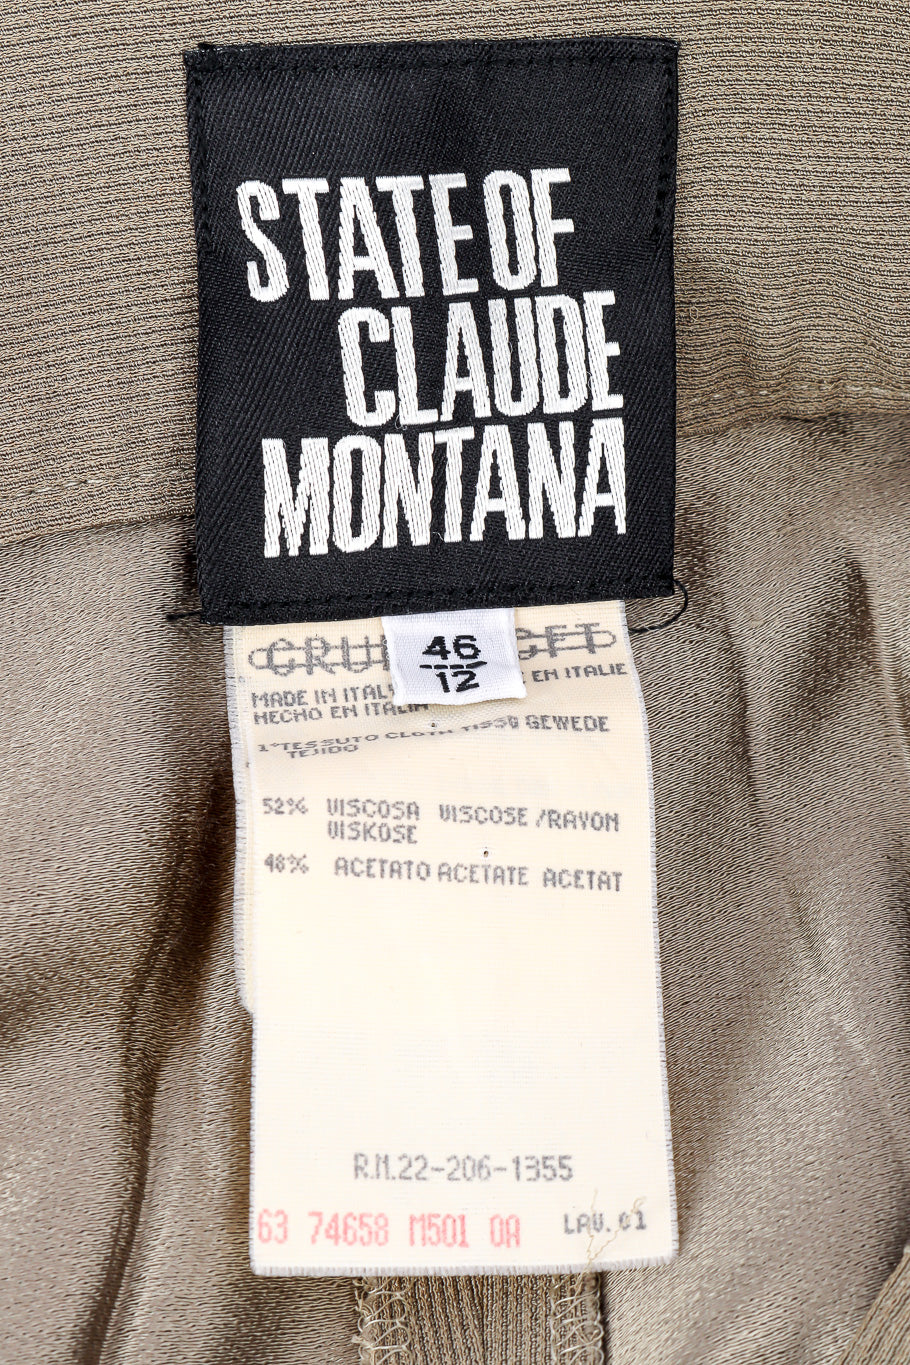  Jacket and pant suit set by State of Claude Montana pants label @recessla